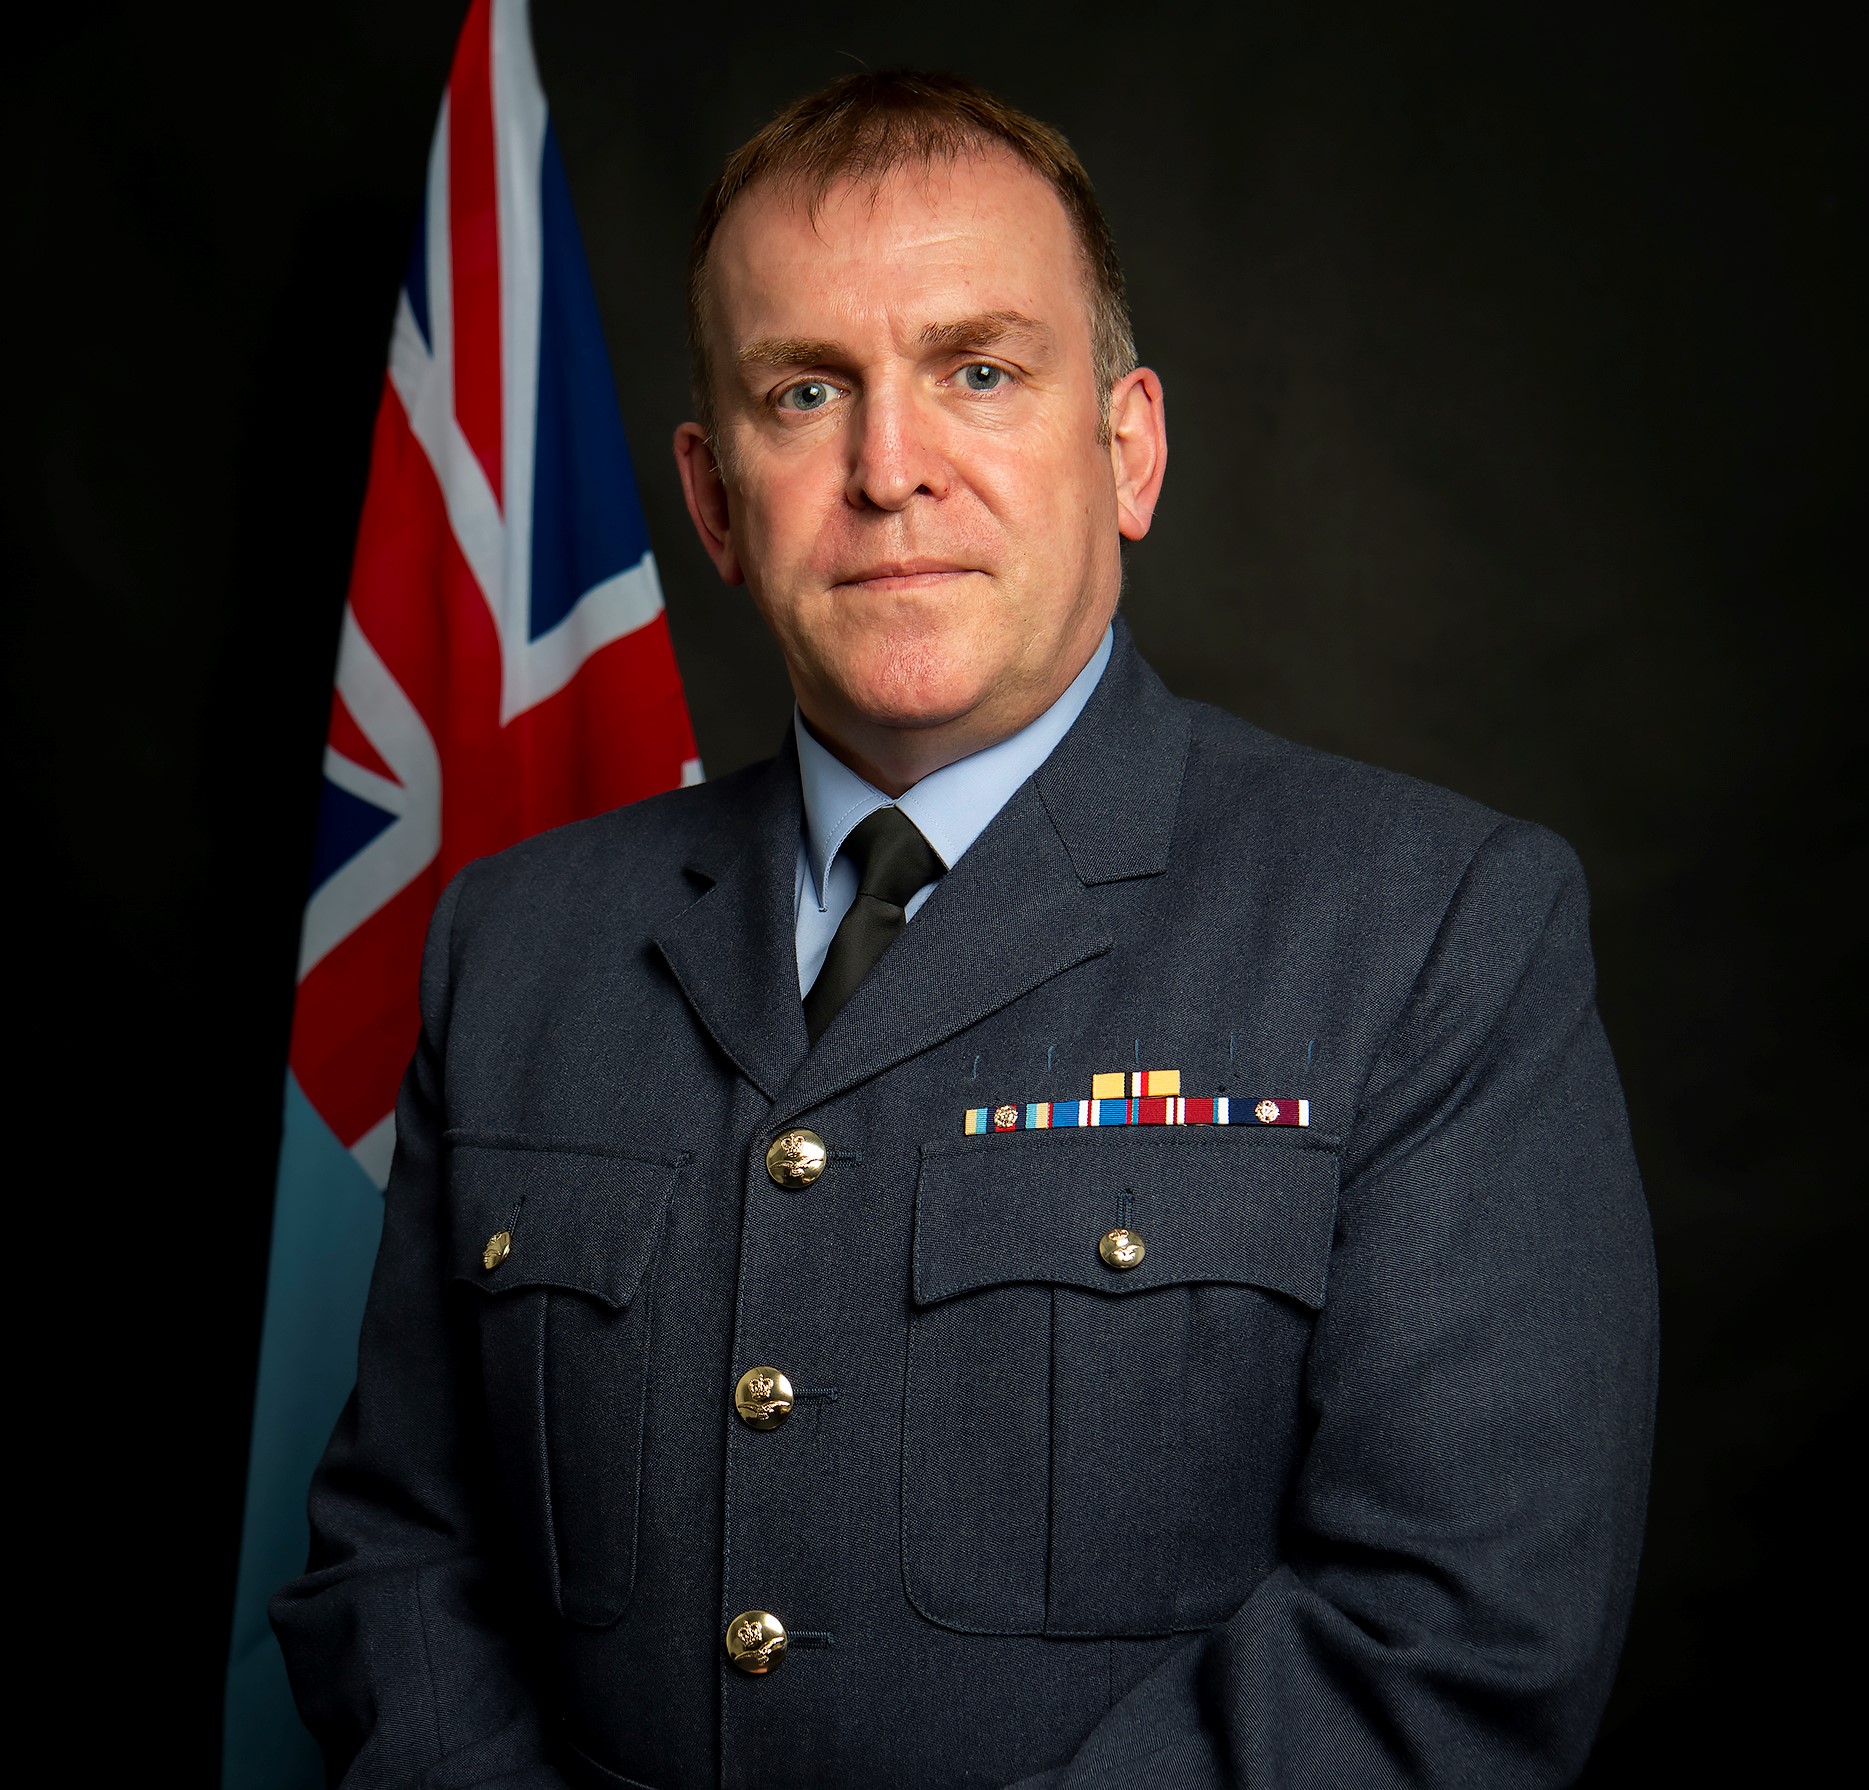 Image shows official portrait of RAF aviator with union jack flag. 